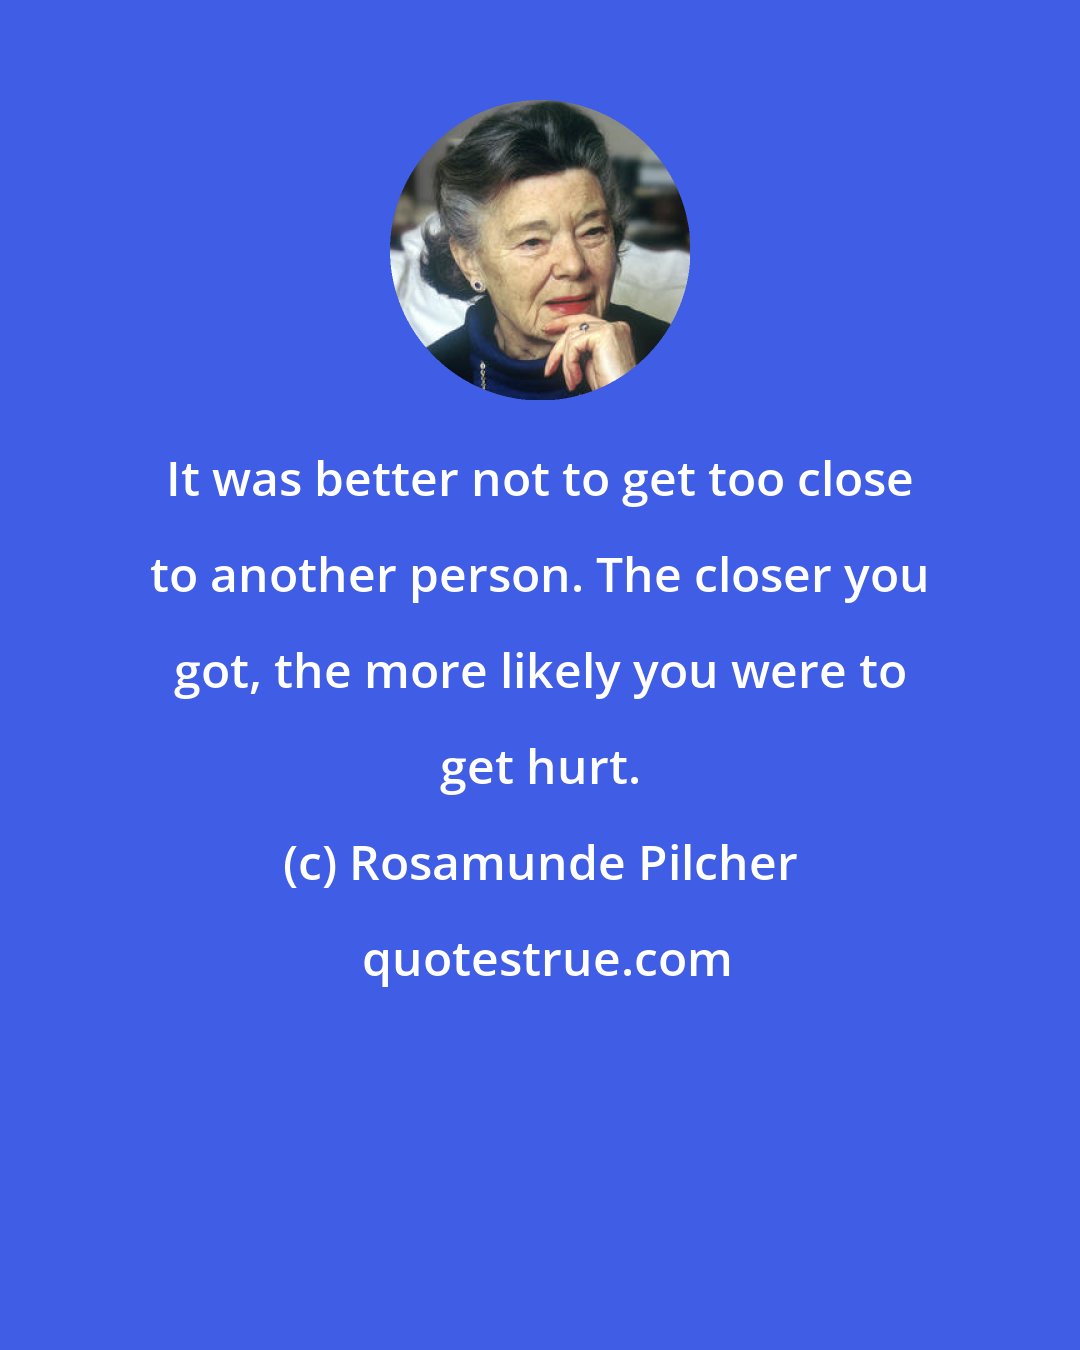 Rosamunde Pilcher: It was better not to get too close to another person. The closer you got, the more likely you were to get hurt.